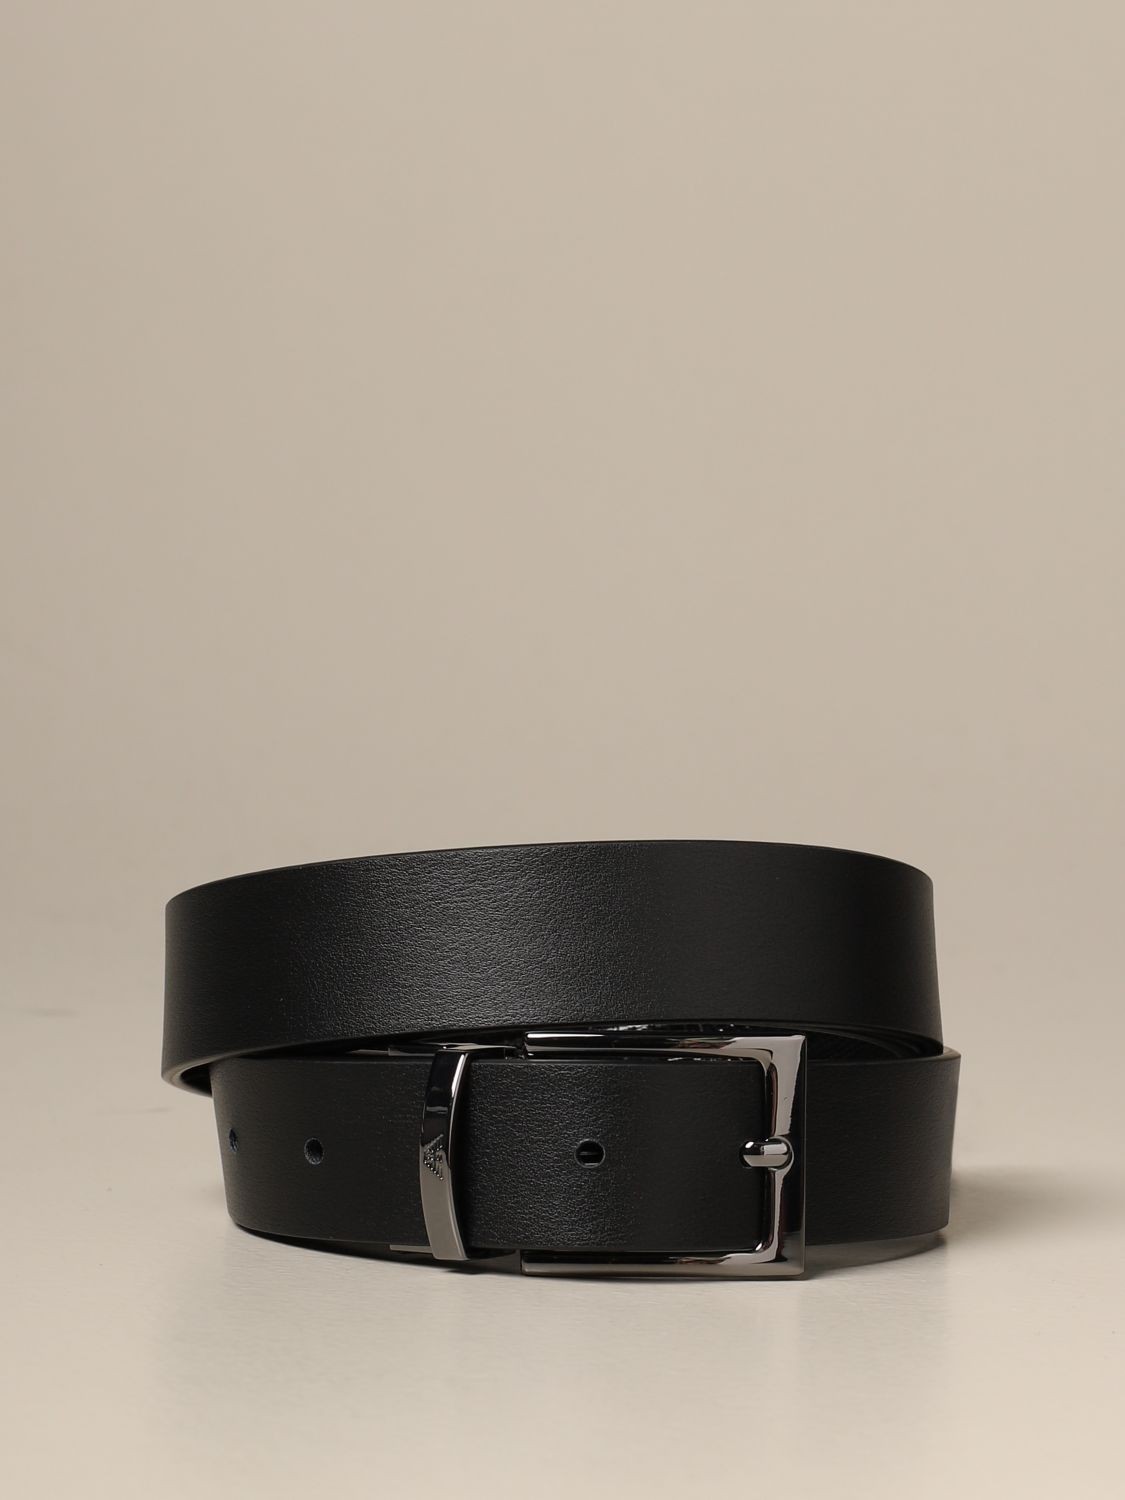 Emporio Armani Reversible belt in calfskin with reptile print Y4S424 YML9J BLACK -Fall Winter 2020 2021 